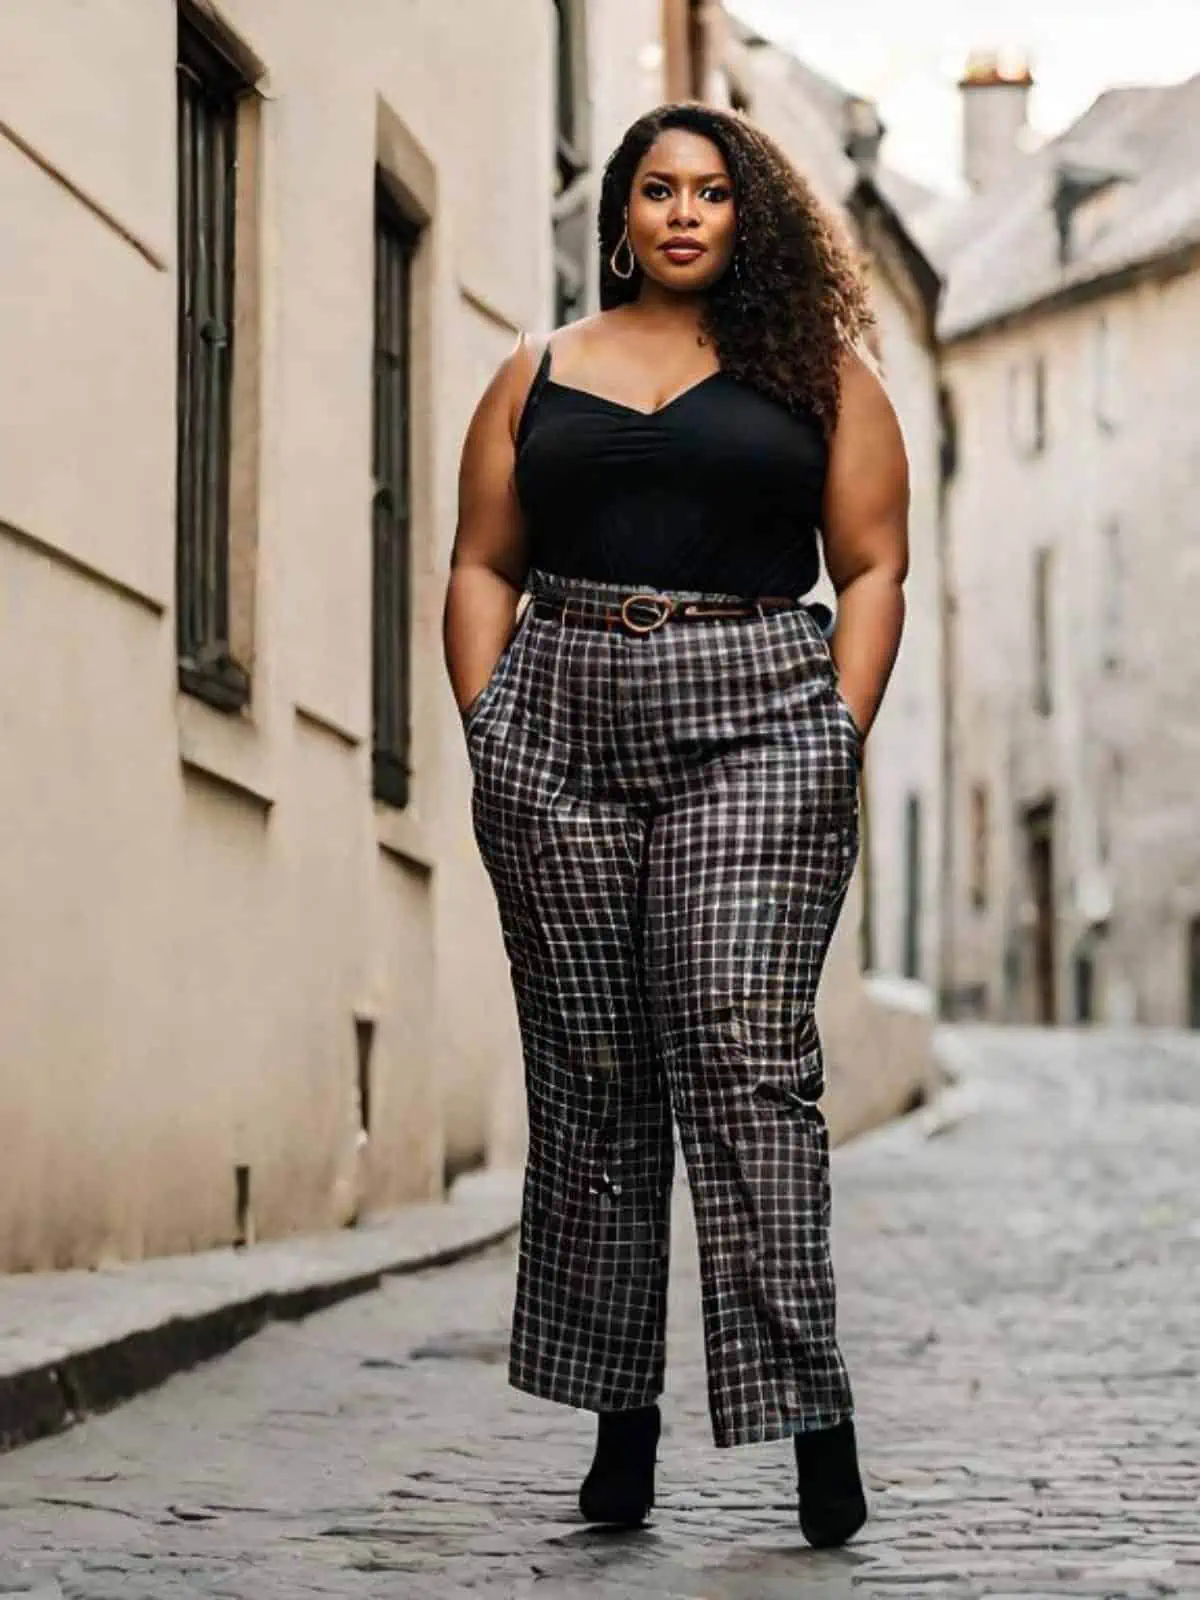 Stylish Fall Outfits: 5 Ways to Rock Plus Size Leggings